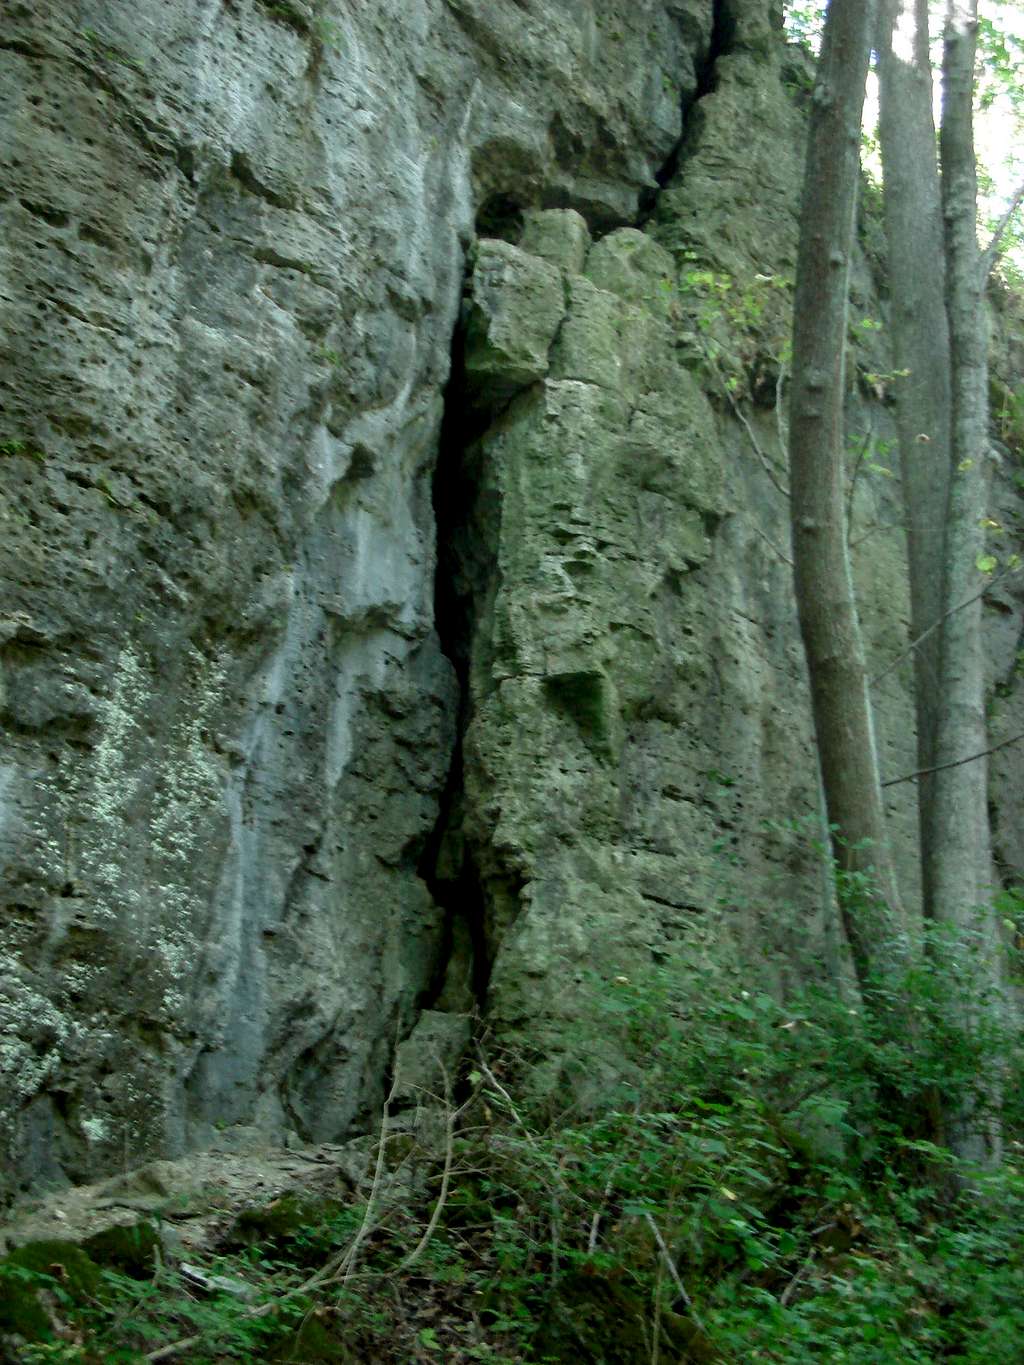 A view of Bong Crack